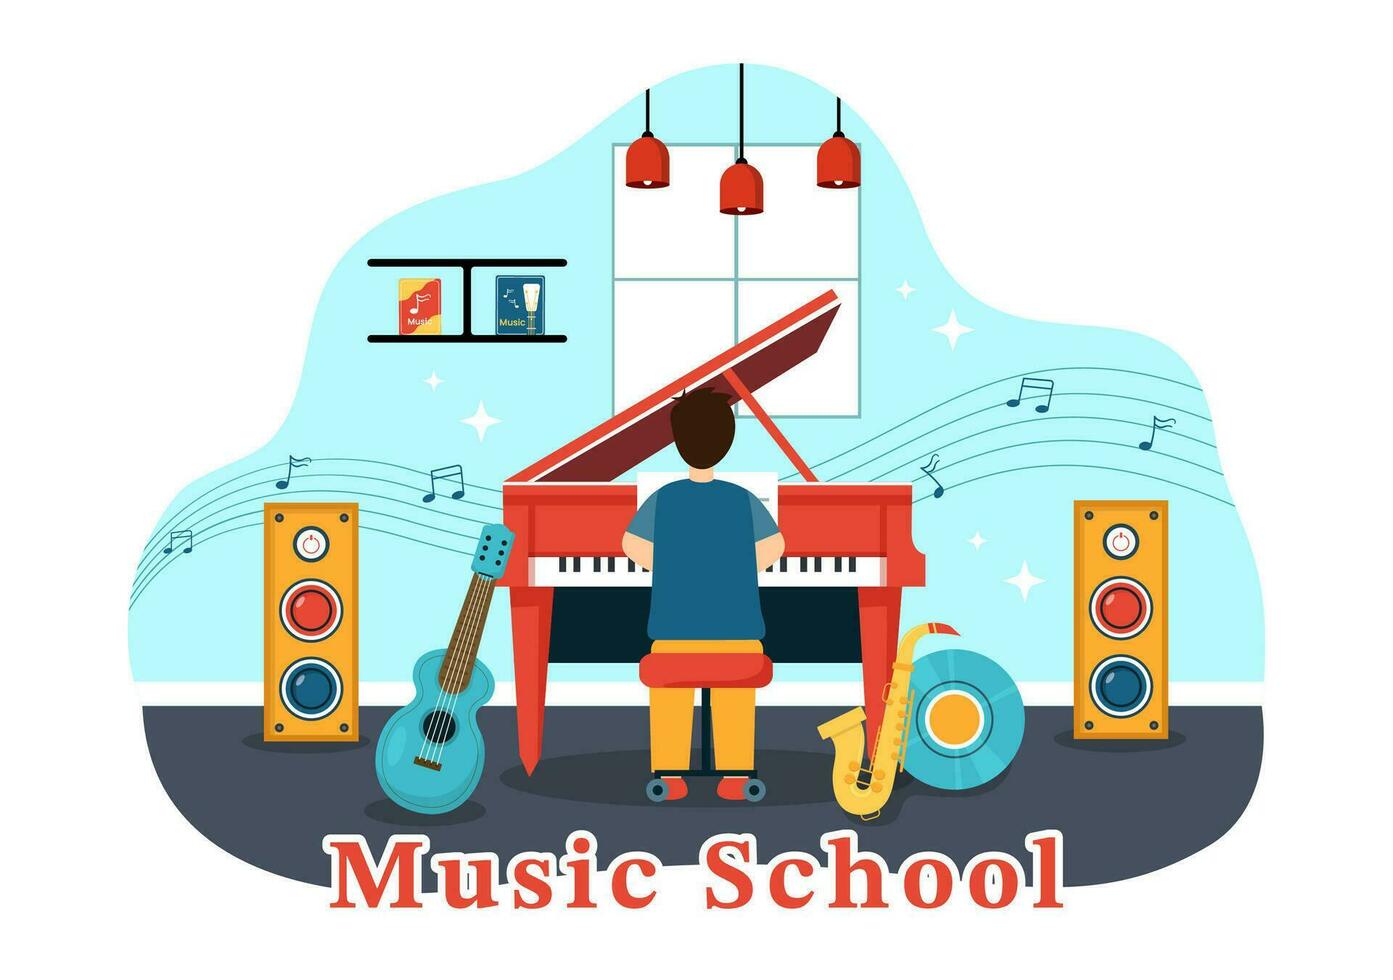 Music School Vector Illustration with Playing Various Musical Instruments, Learning Education Musicians and Singers in Flat Kids Cartoon Background